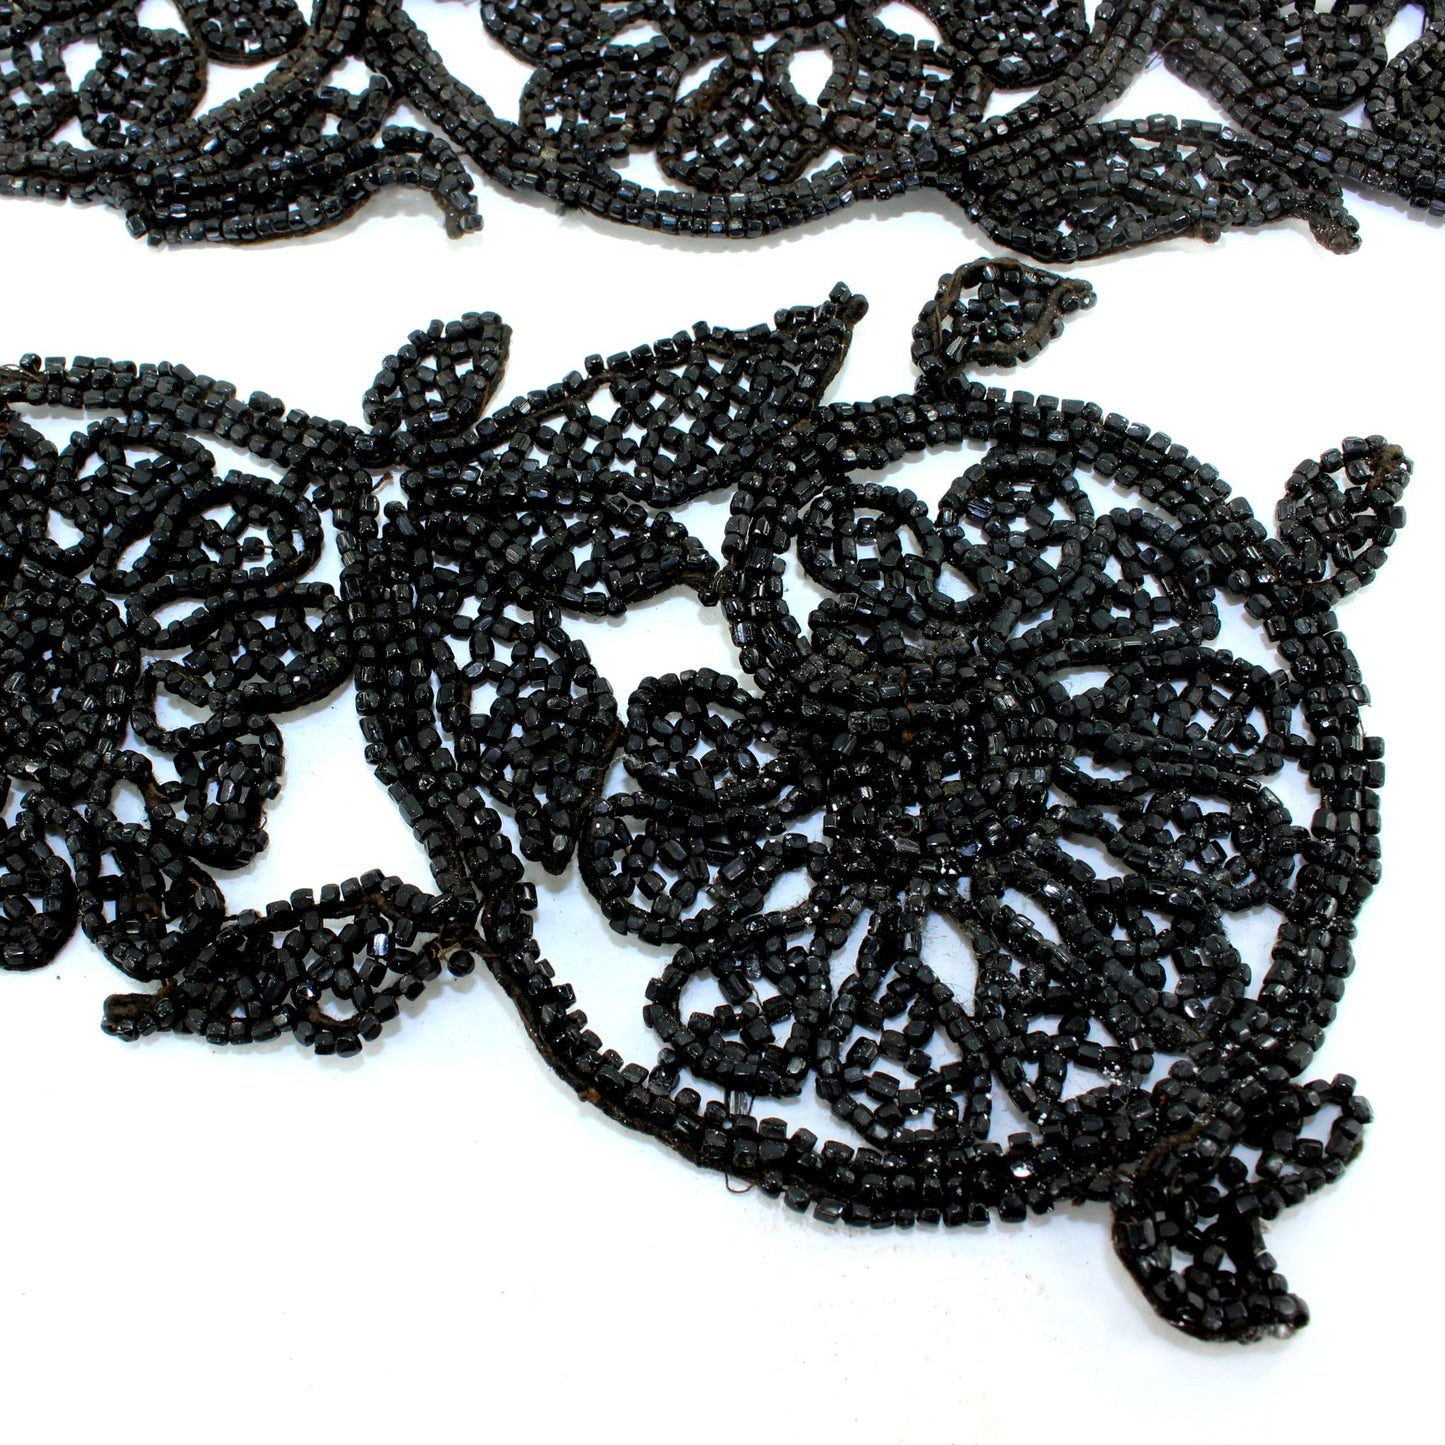 Lot 3 Antique Vintage Black Beaded Pieces for DIY Victorian Projects Collar nice condition usable beadwork